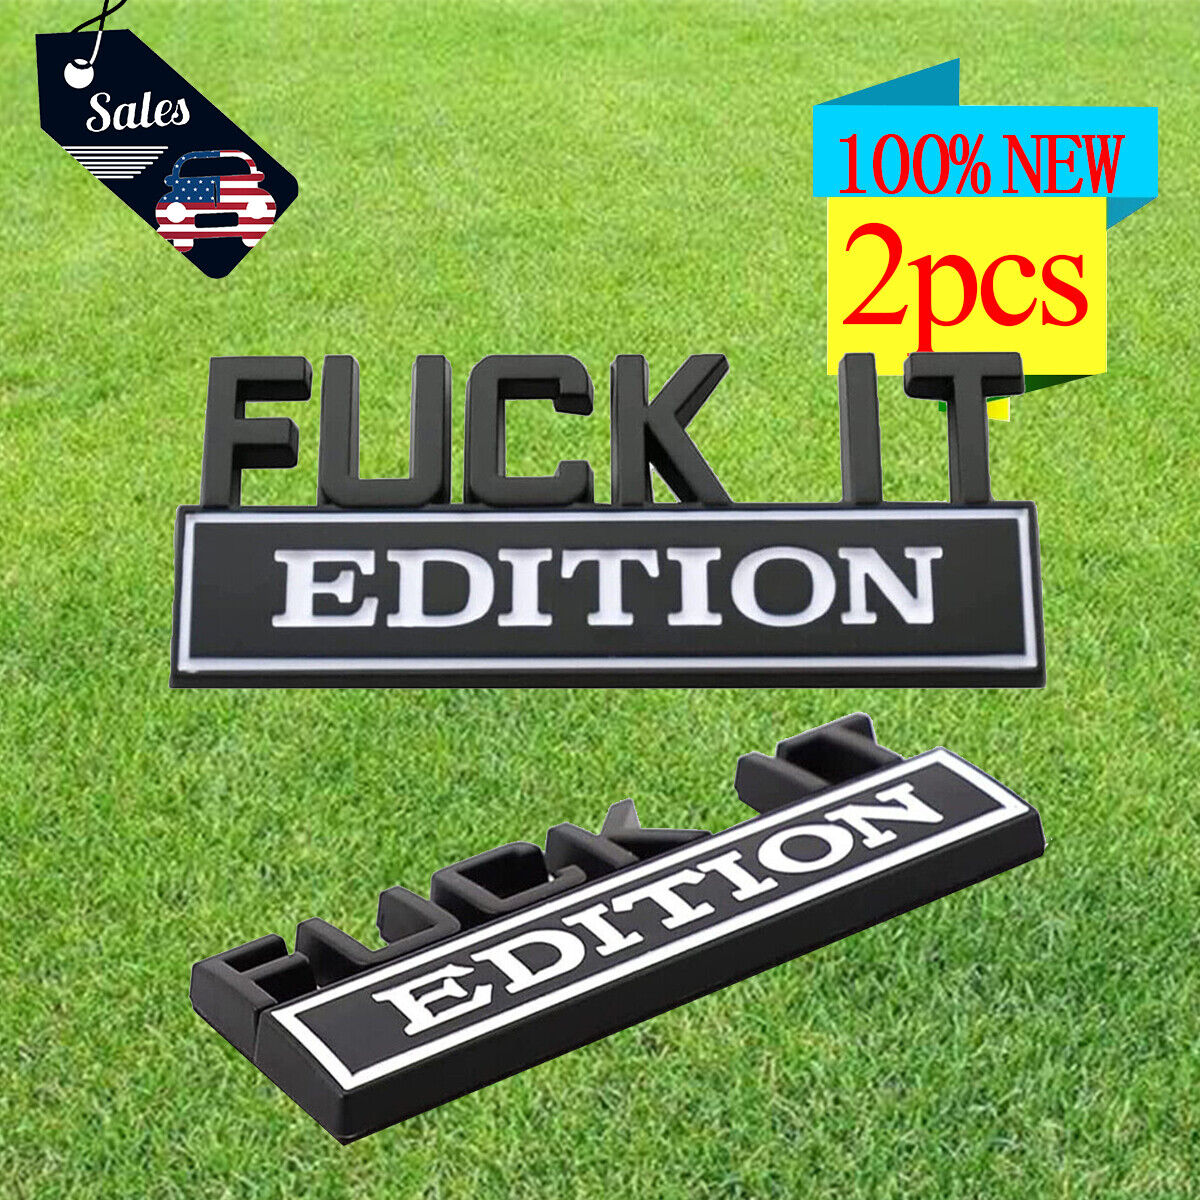 Fuck-IT Edition 3D Emblem Badge Decals for Universal Car Truck (Black White) 2PC